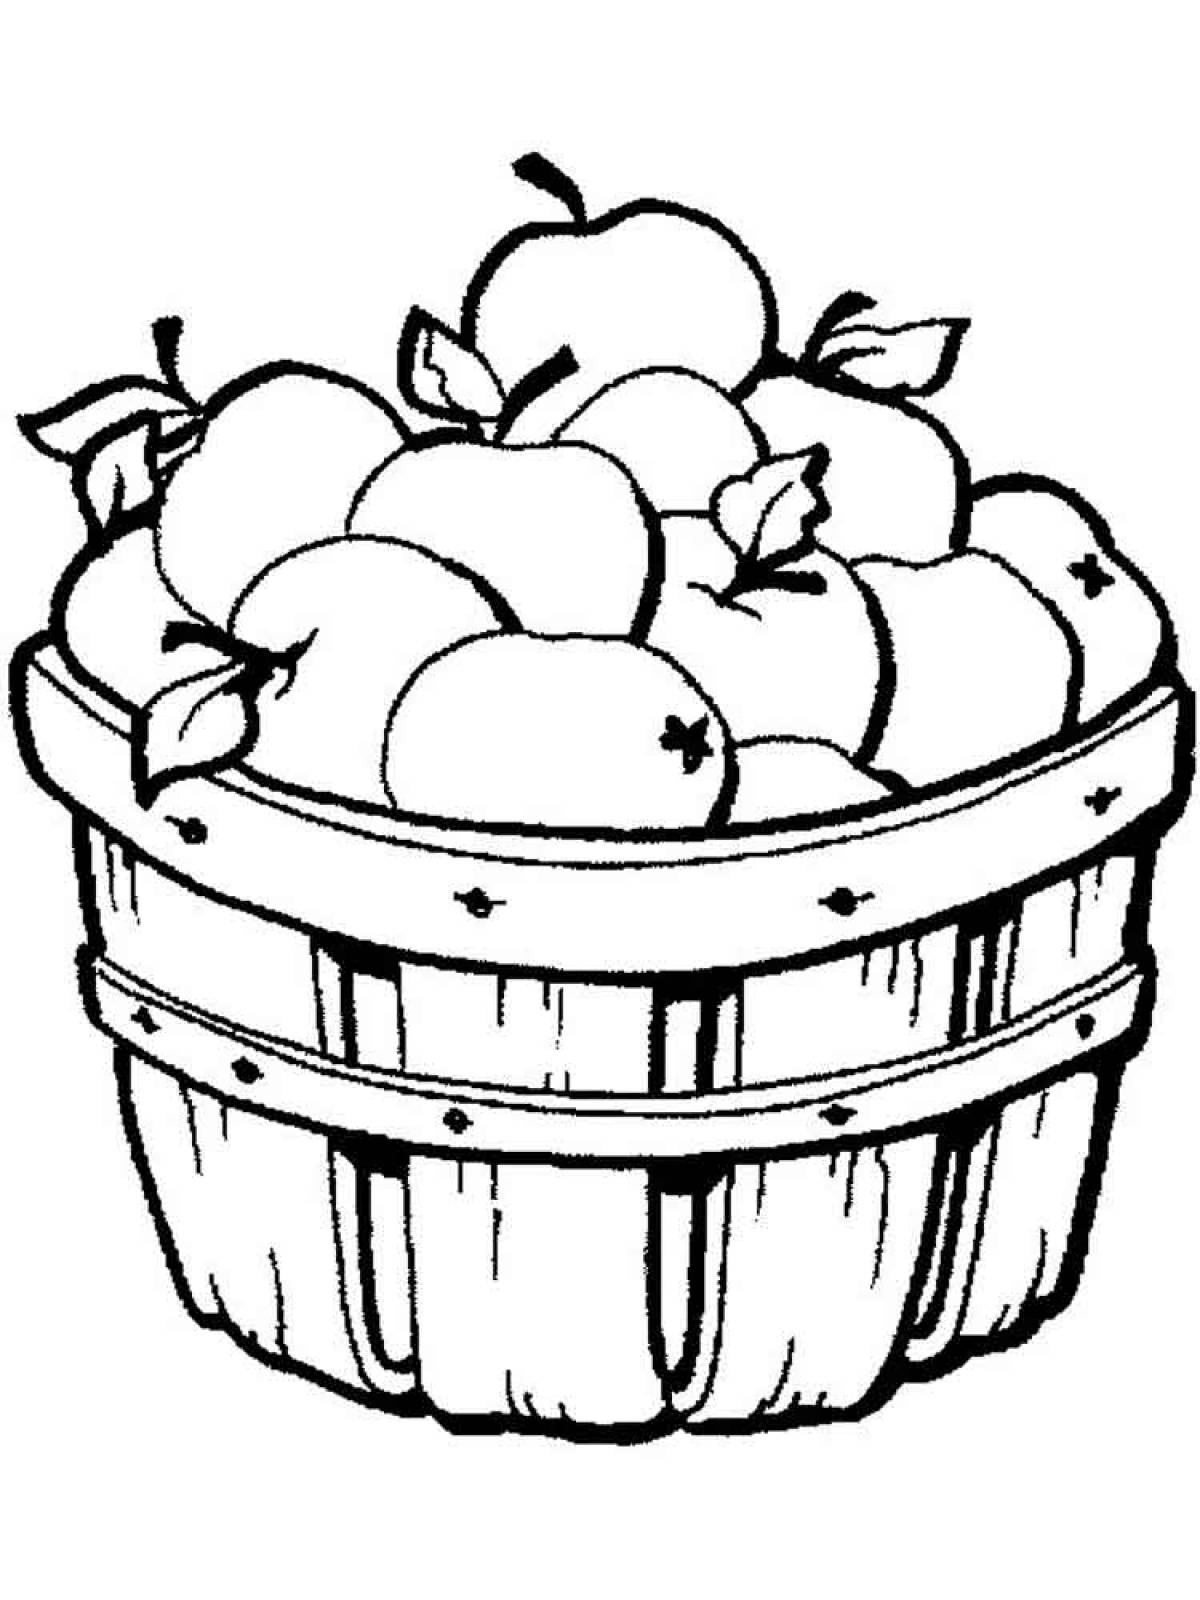 Apples in a tub